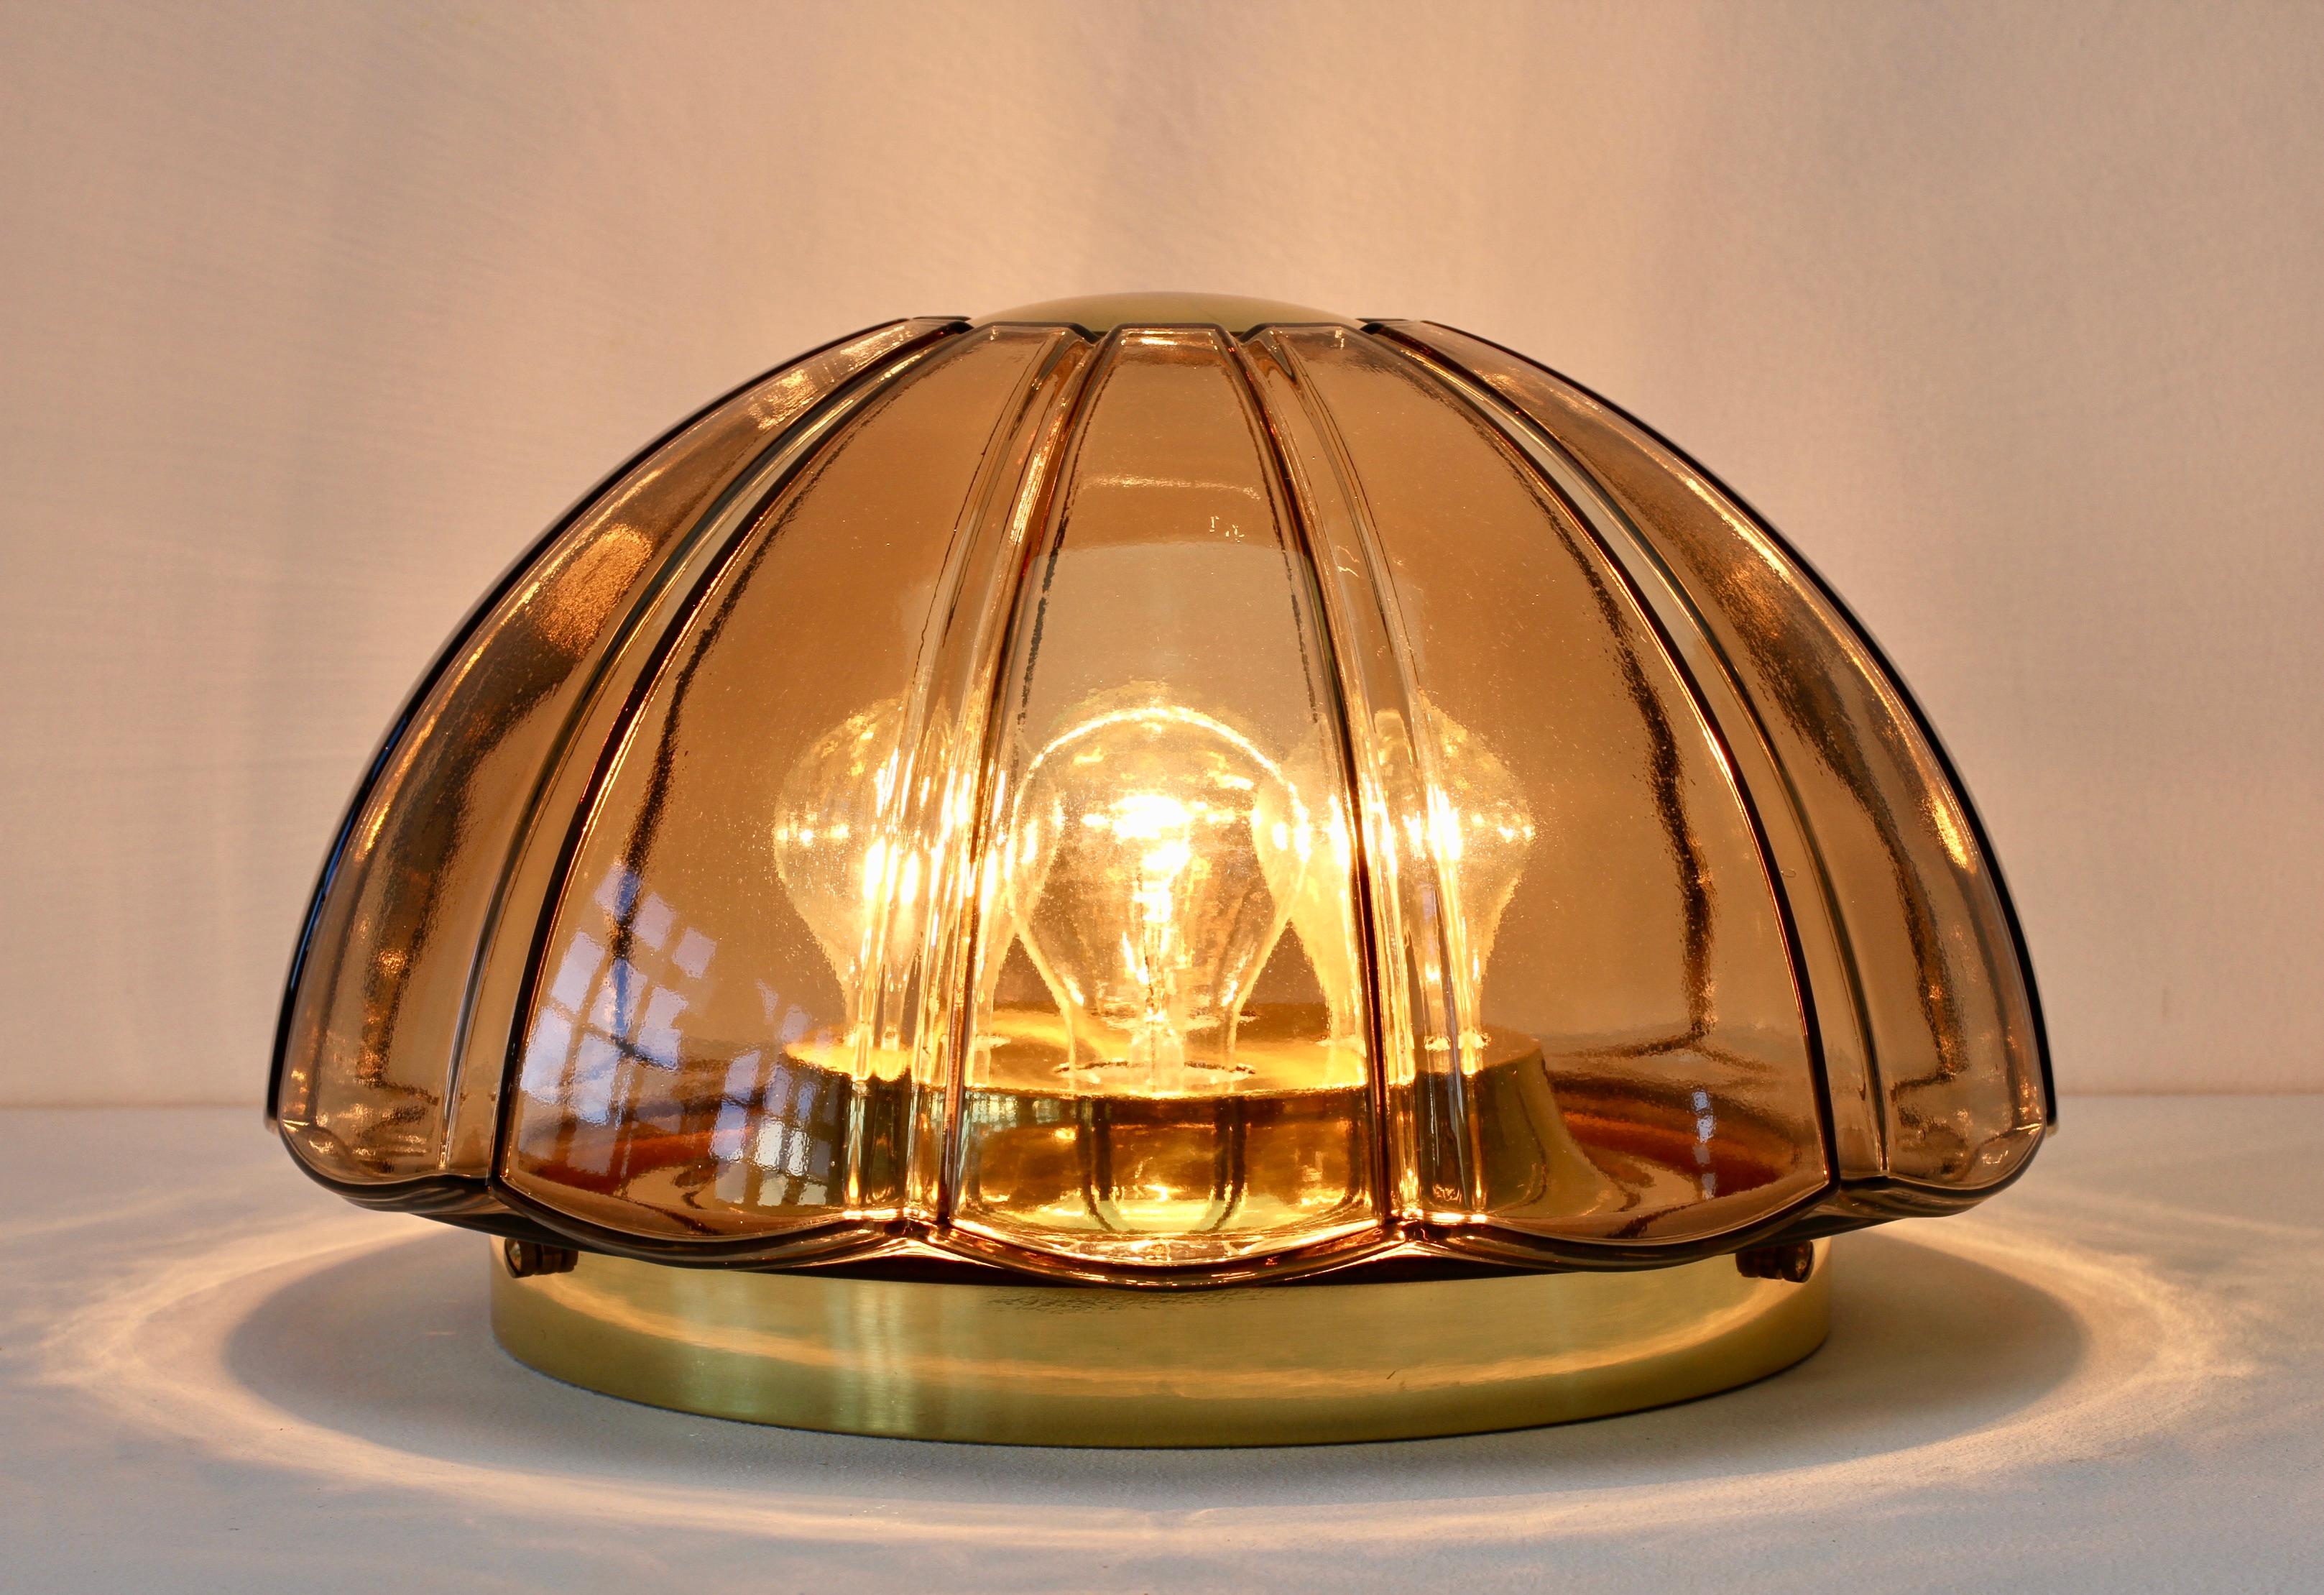 Brass Limburg 1 of 3 Large Toned Textured Glass Flushmount Wall Lights or Sconces For Sale